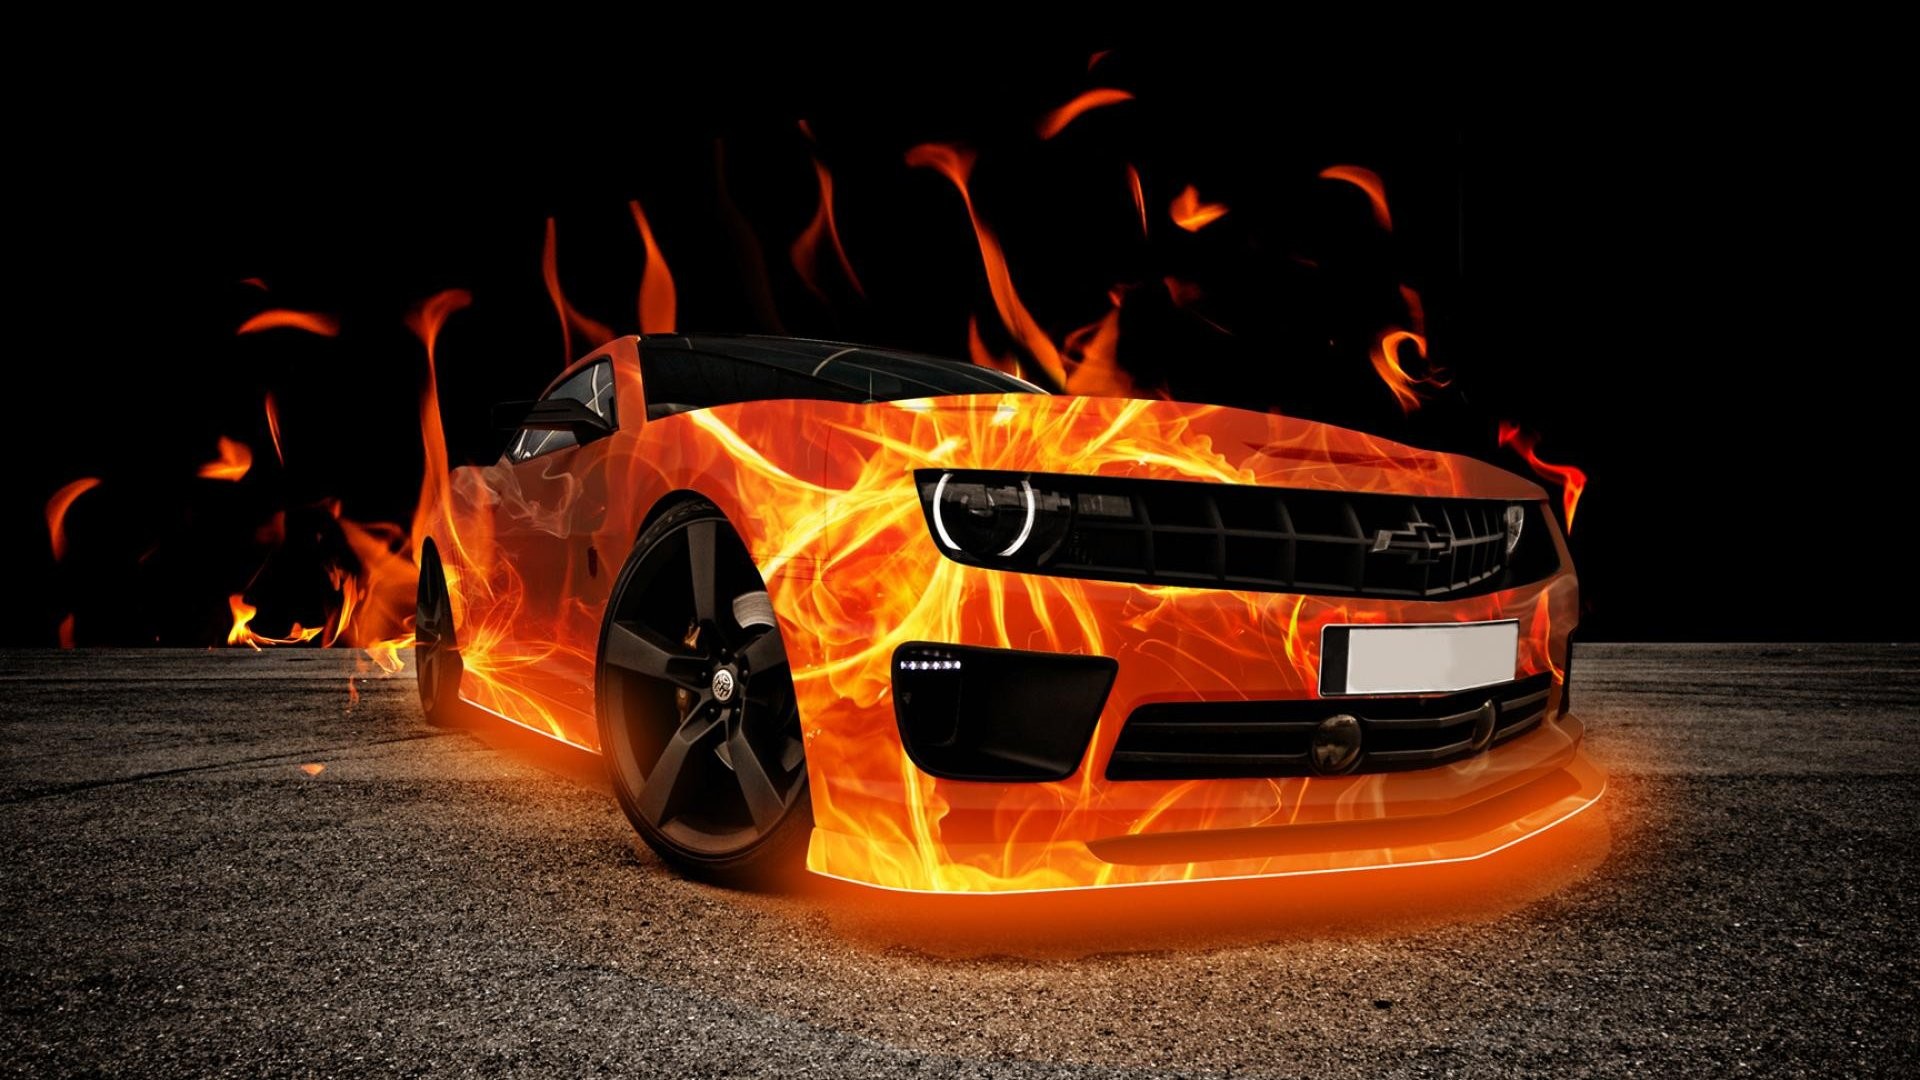 1920x1080 Cool Backgrounds Hd 3d Car 99 with Cool Backgrounds Hd 3d Car